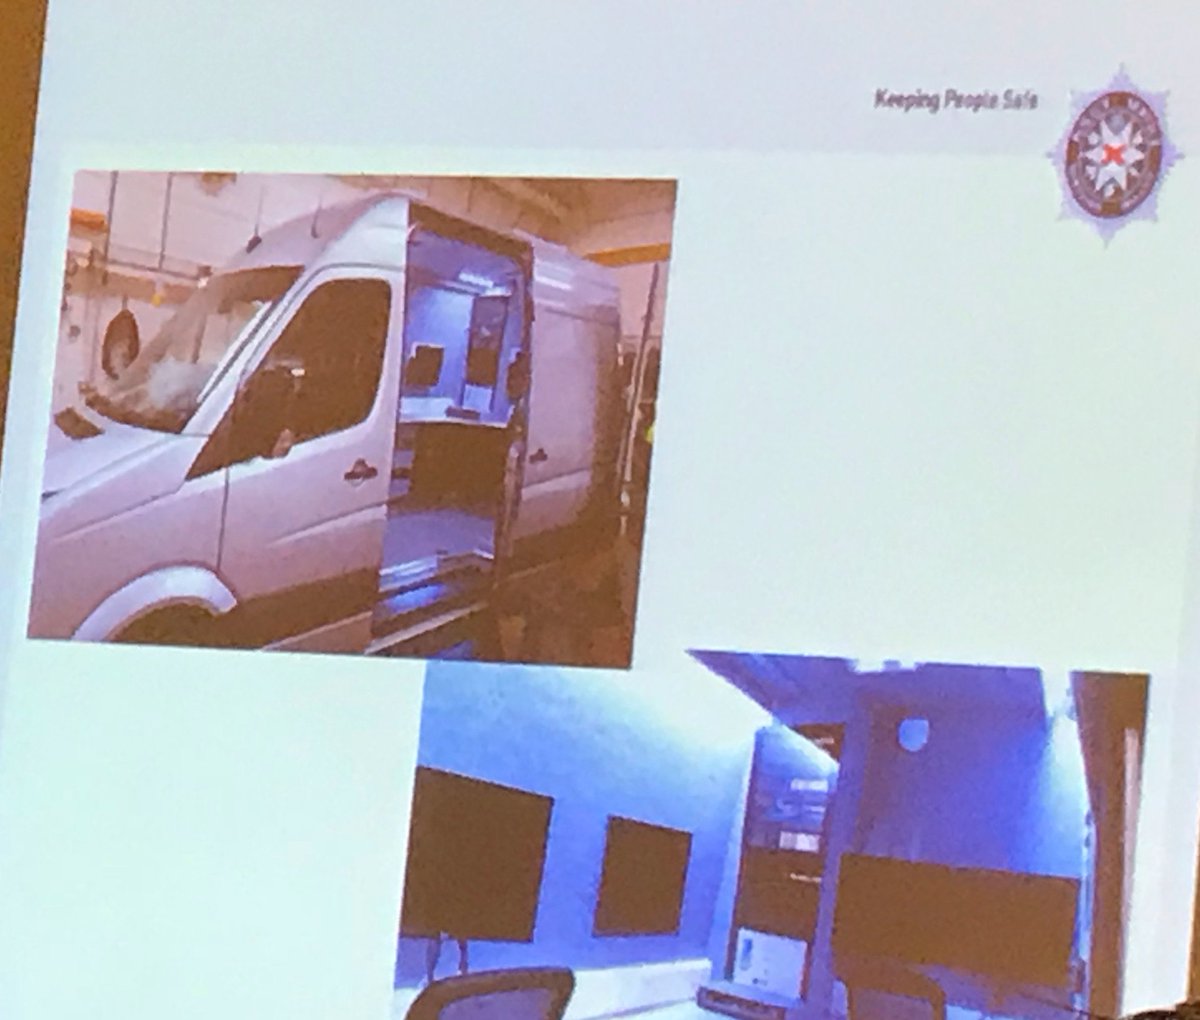 Cyber crime mobile labs now deployed  in Northern Ireland #cyberni